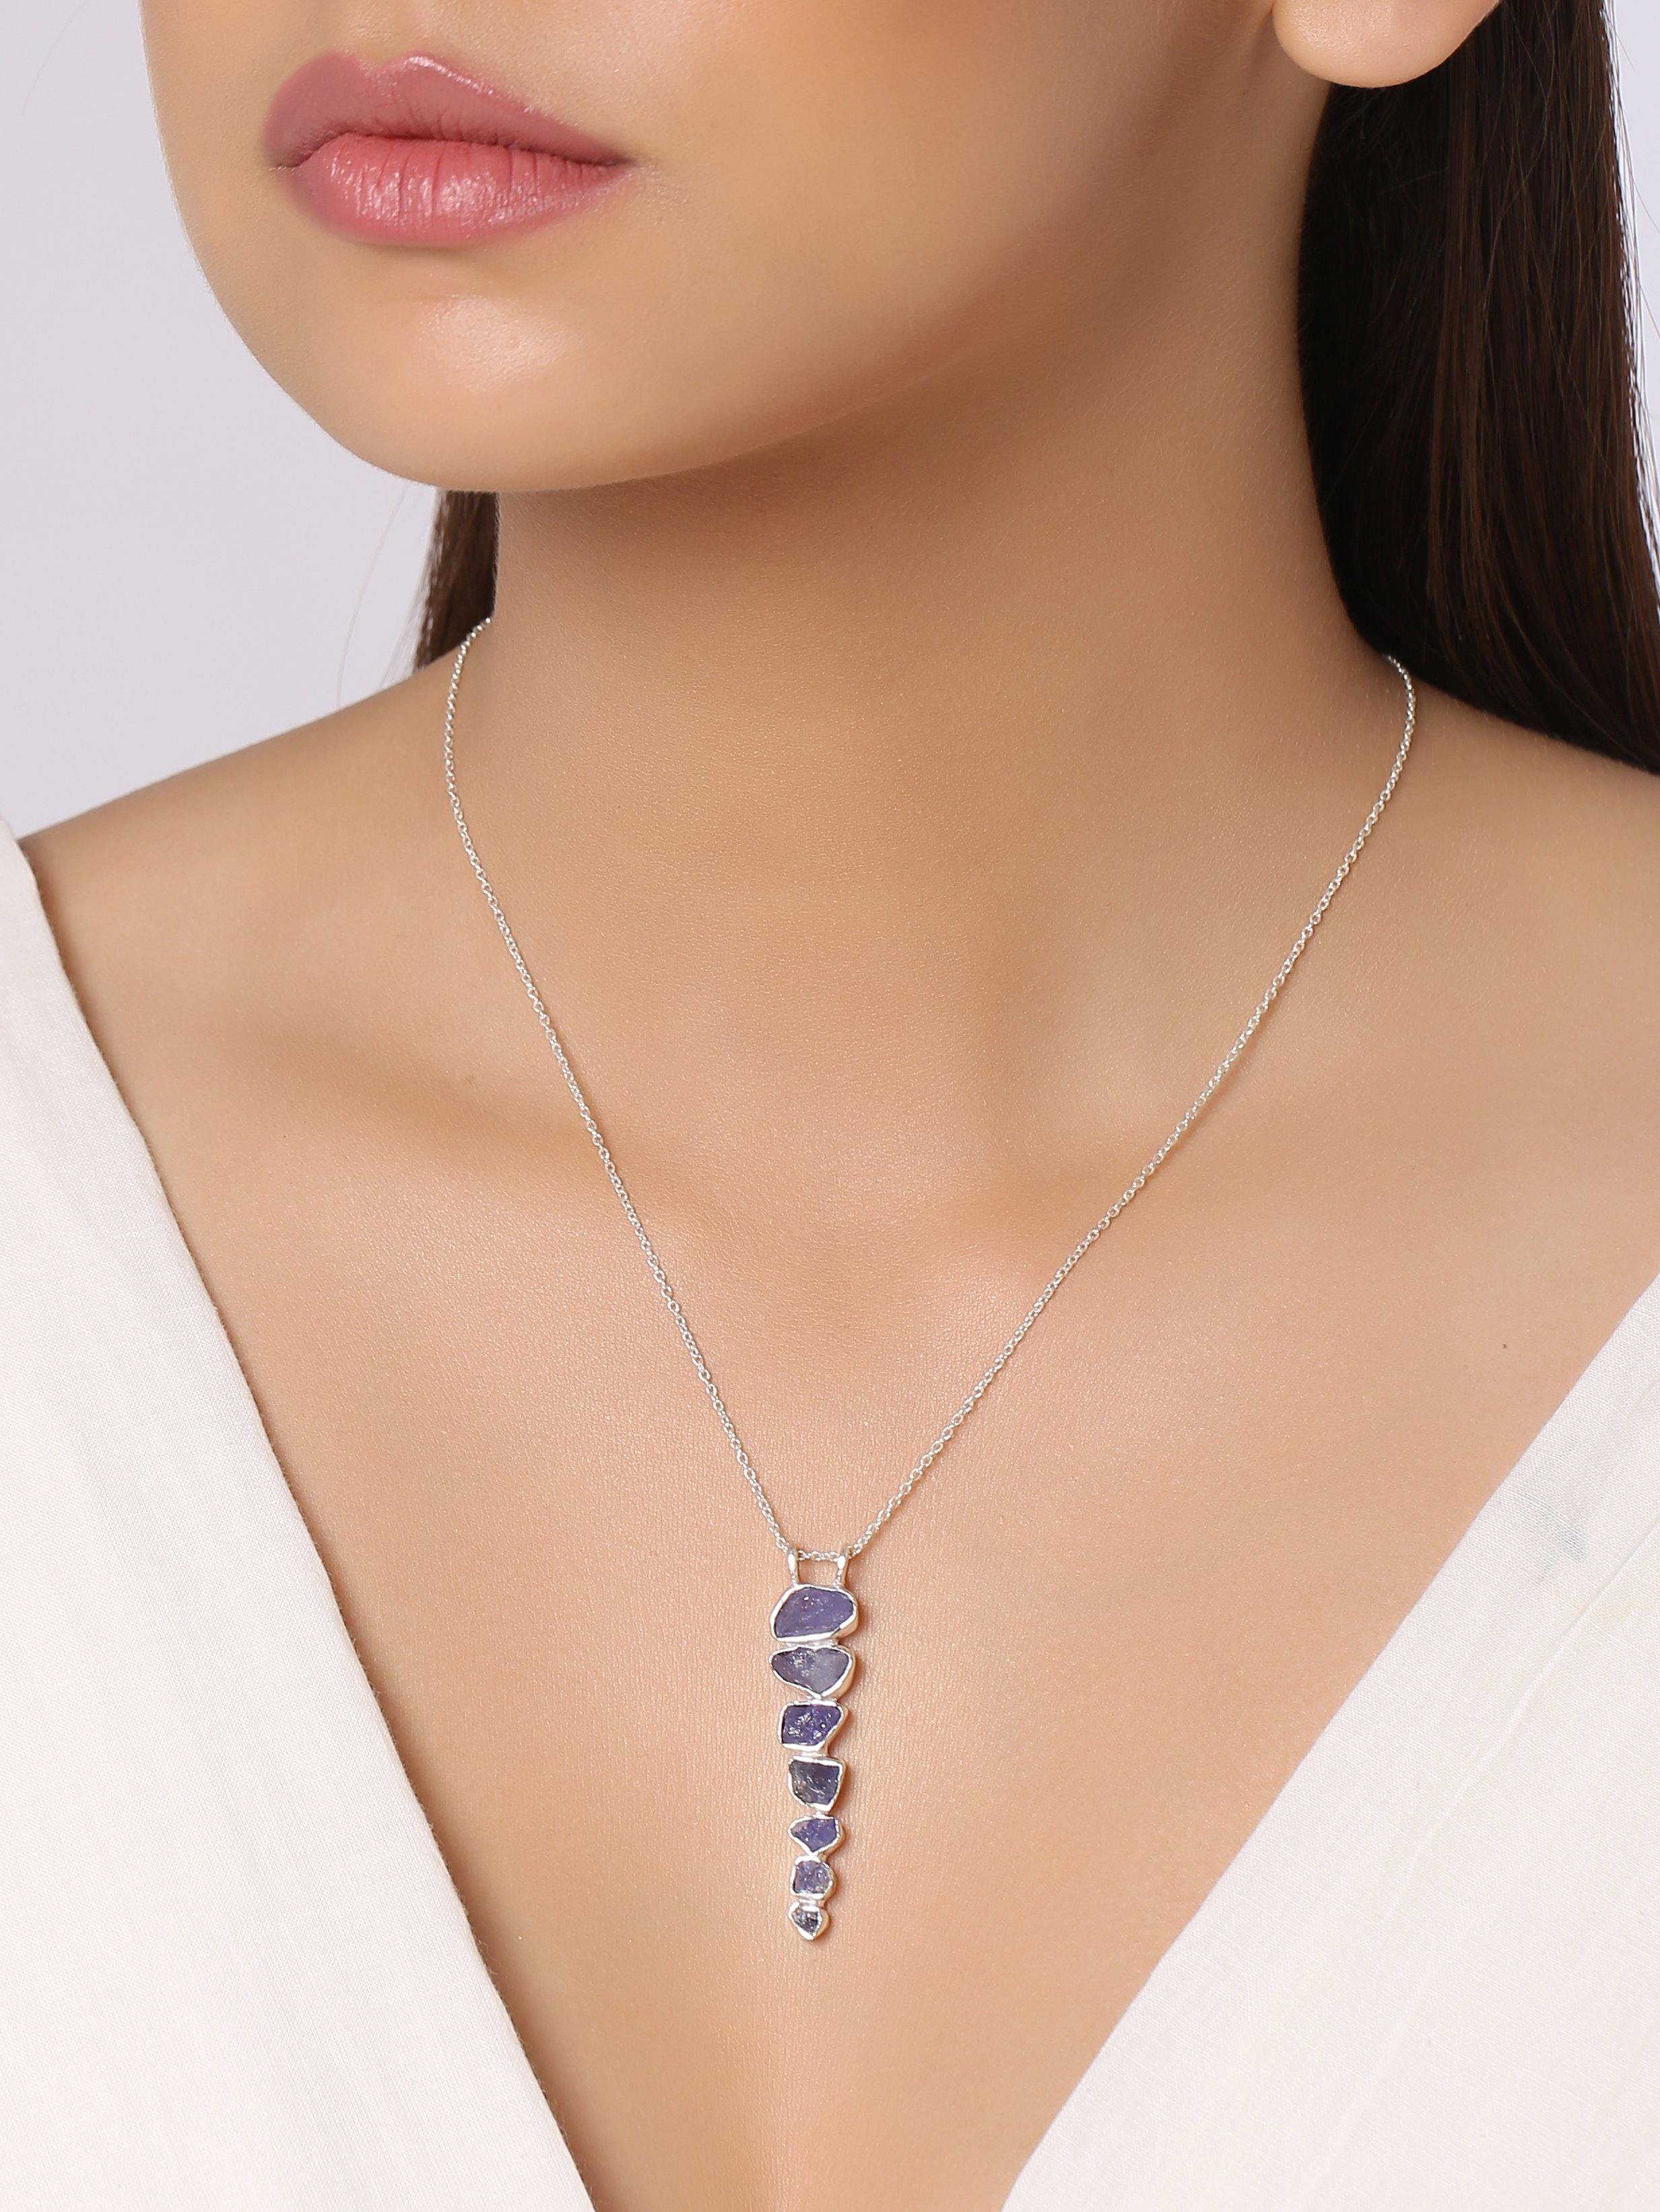 Rough Tanzanite Solid 925 Sterling Silver Pendant with 18 Inch Chain Necklace Jewelry - YoTreasure